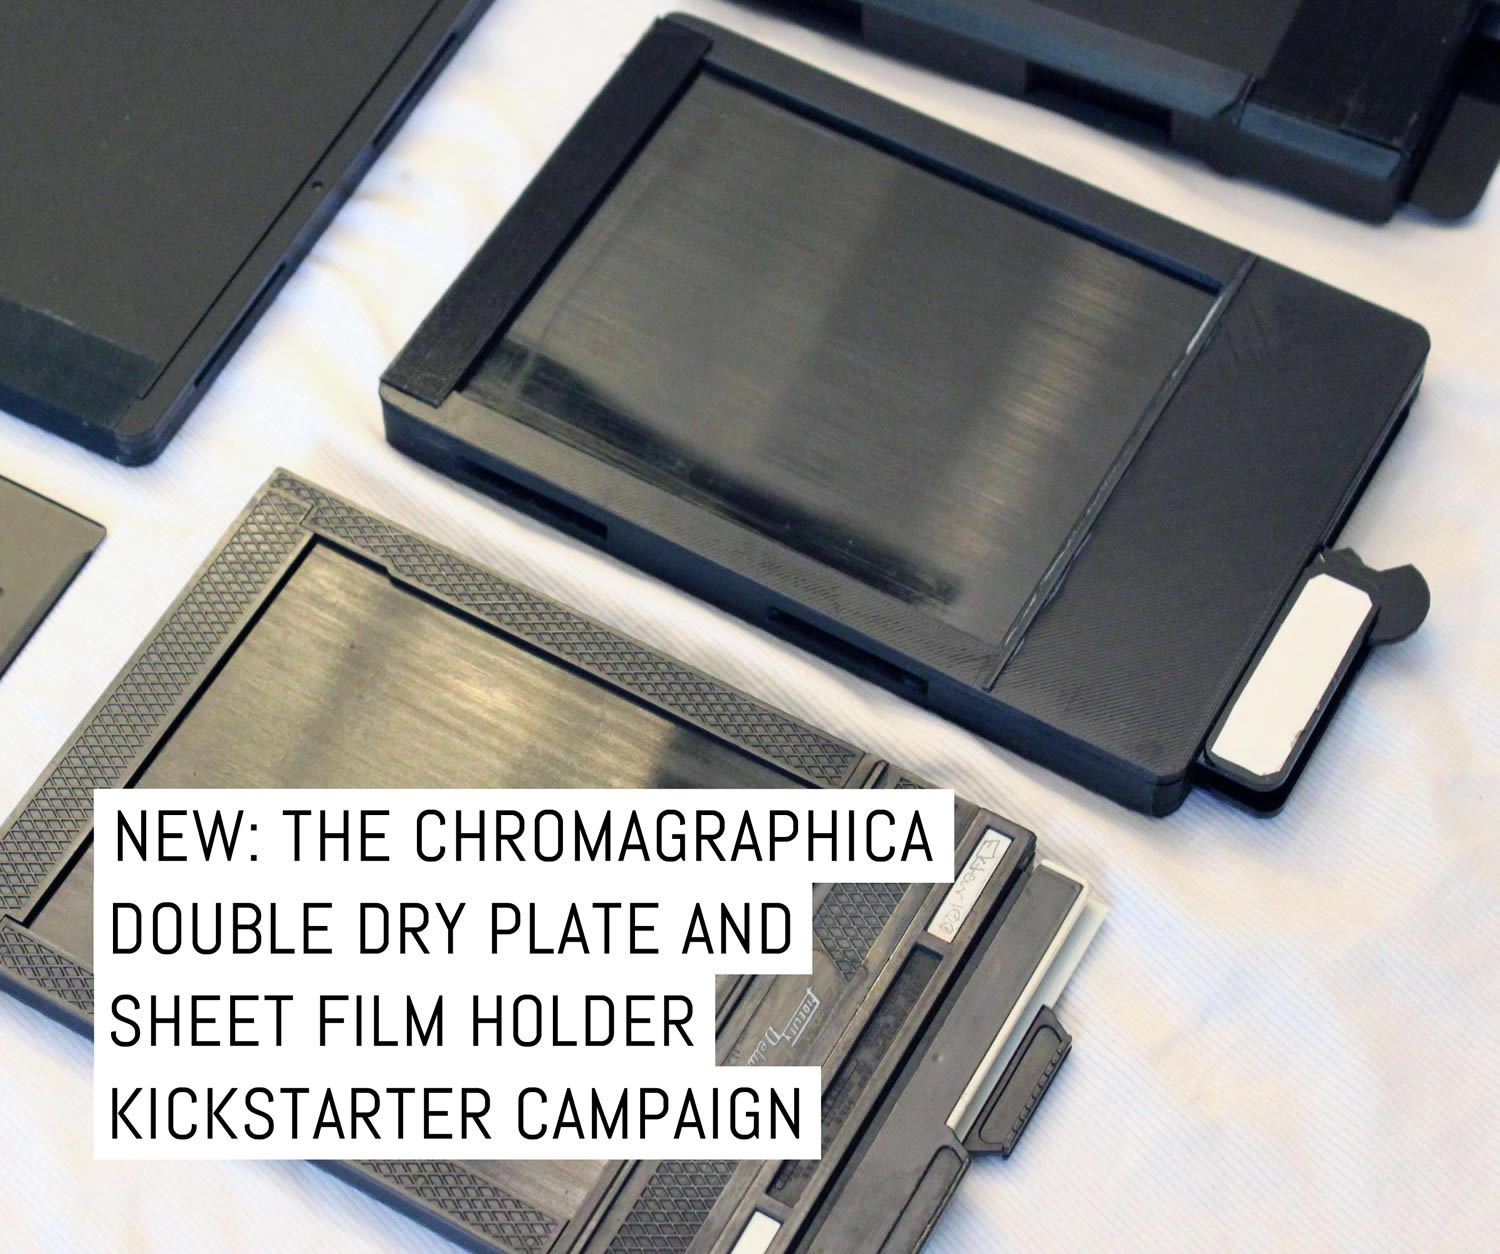 Announcing the ChromaGraphica double dry plate and sheet film holder Kickstarter campaign